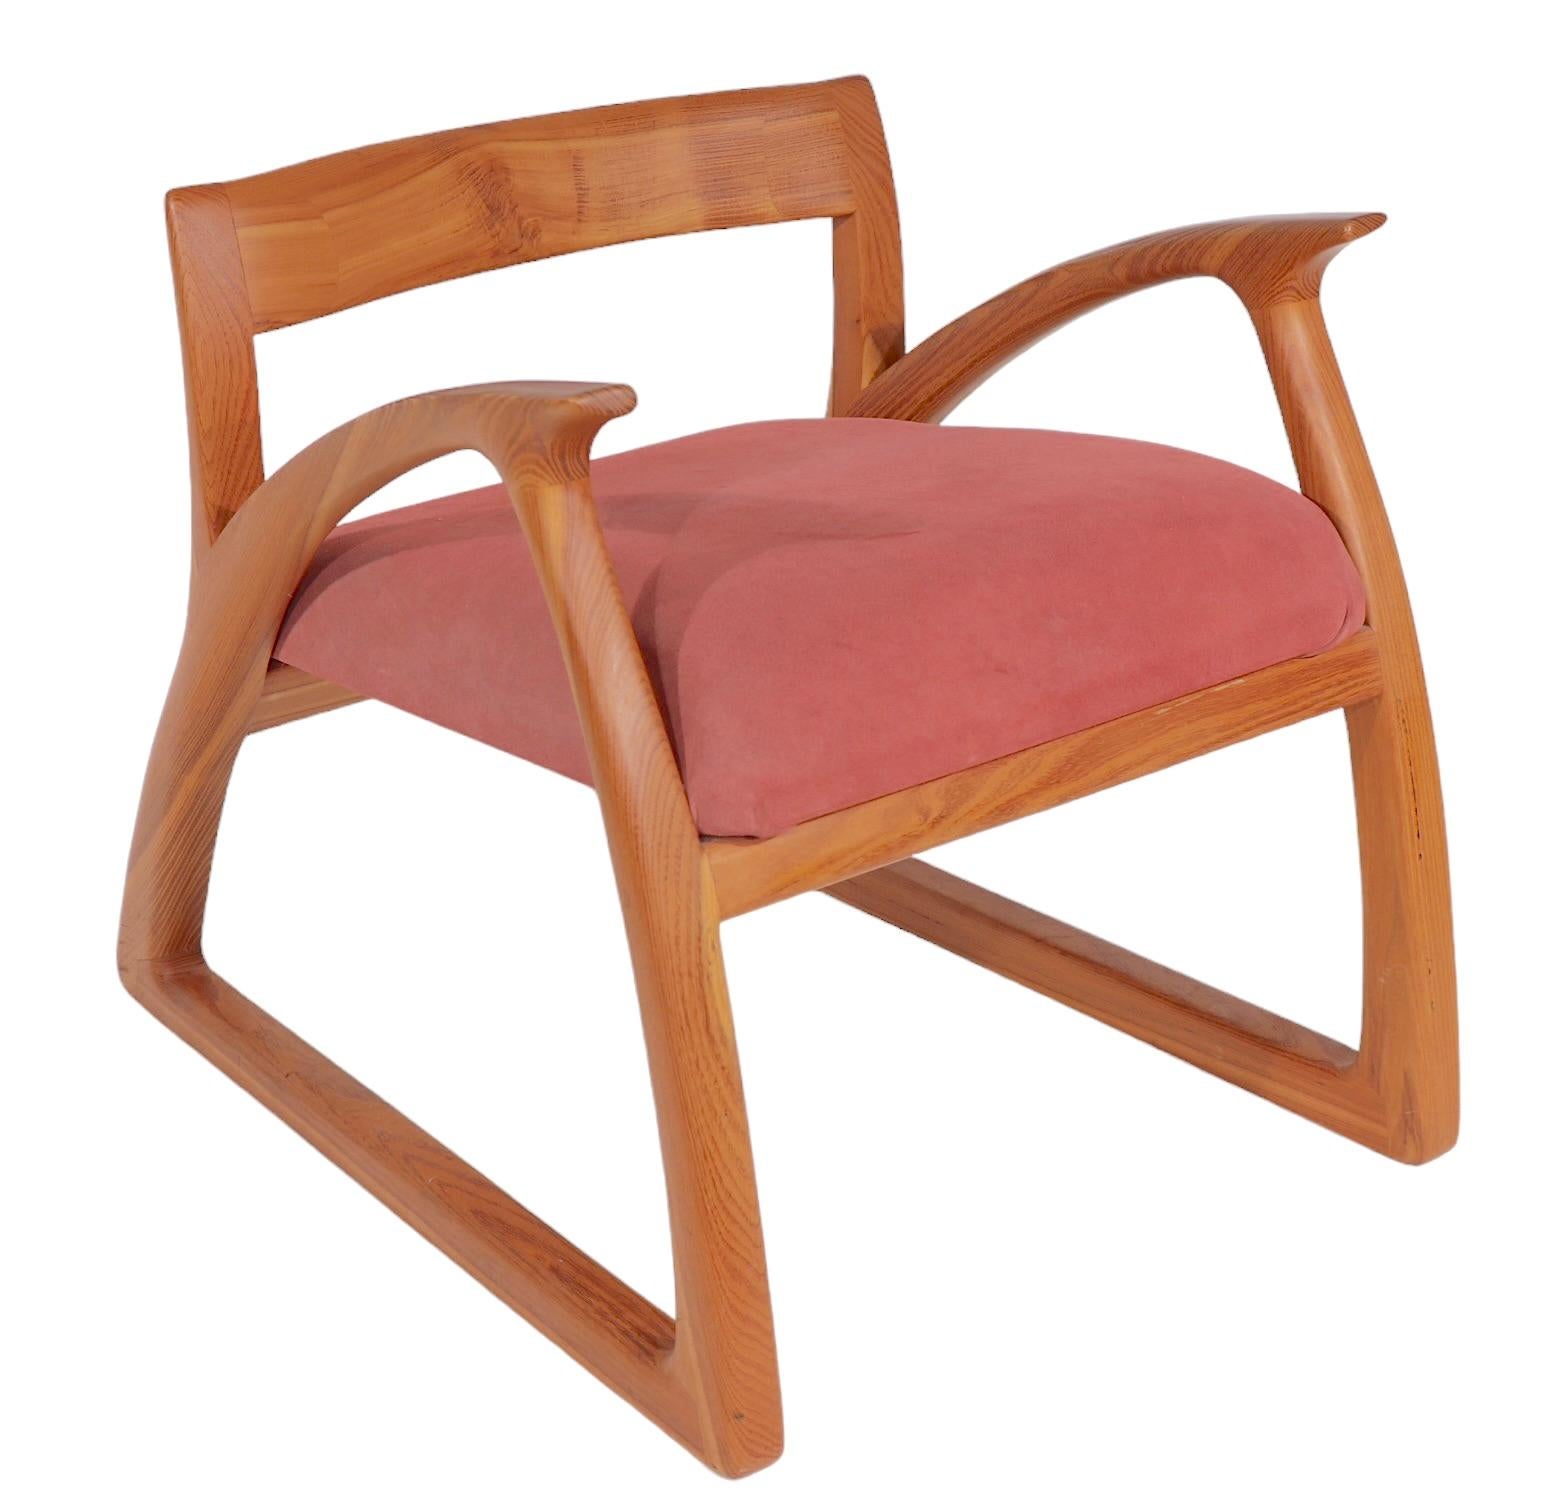 Studio Hand Made - Crafted Wood Arm / Lounge Chair For Sale 6